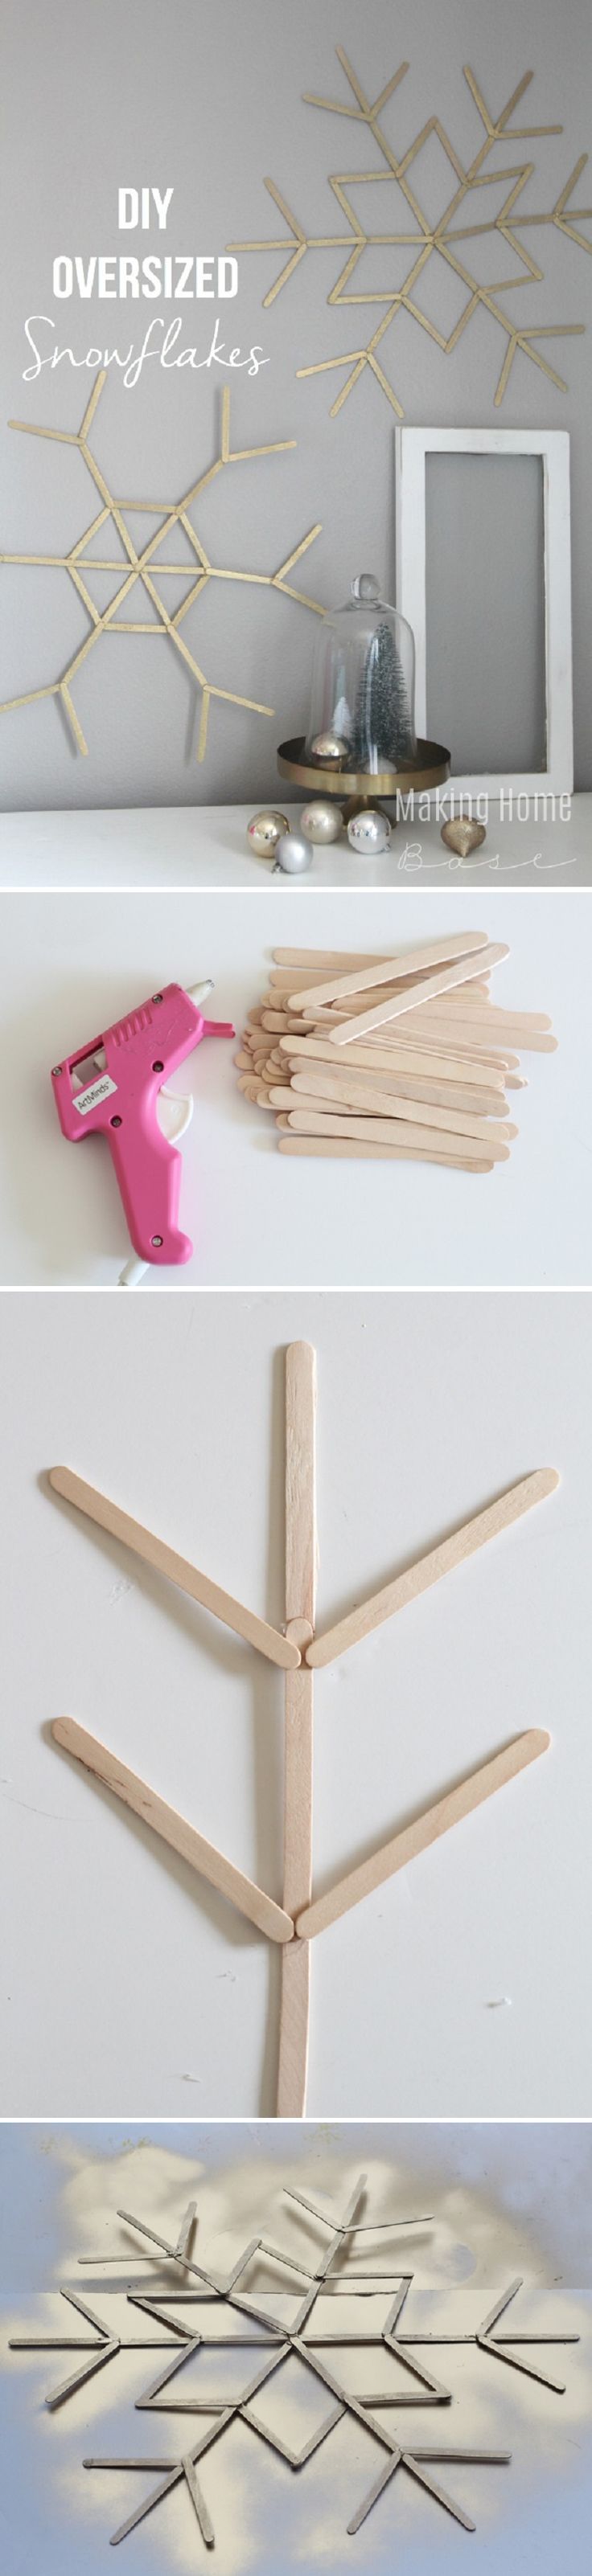 DIY Oversized Snowflakes from popsicle sticks